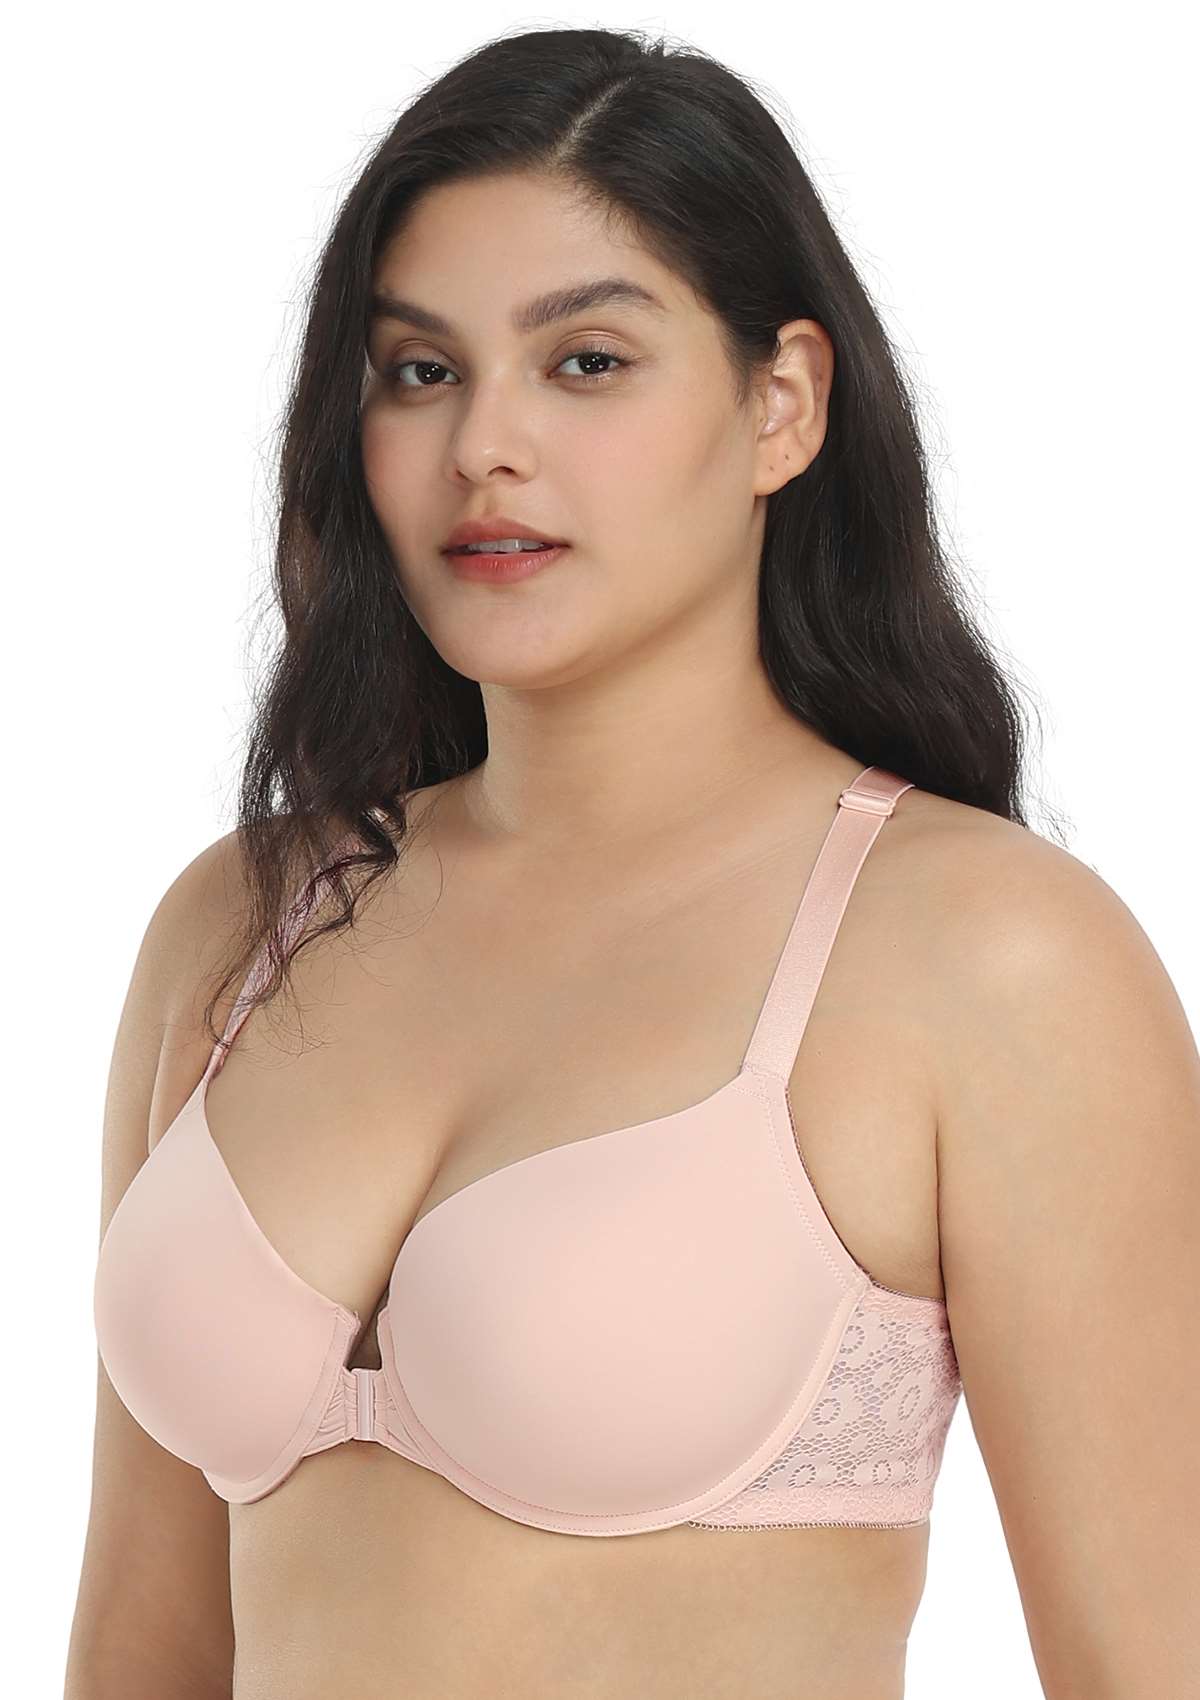 HSIA Serena Front-Close Lace Racerback Underwire Bra For Back Support - Pink / 38 / D